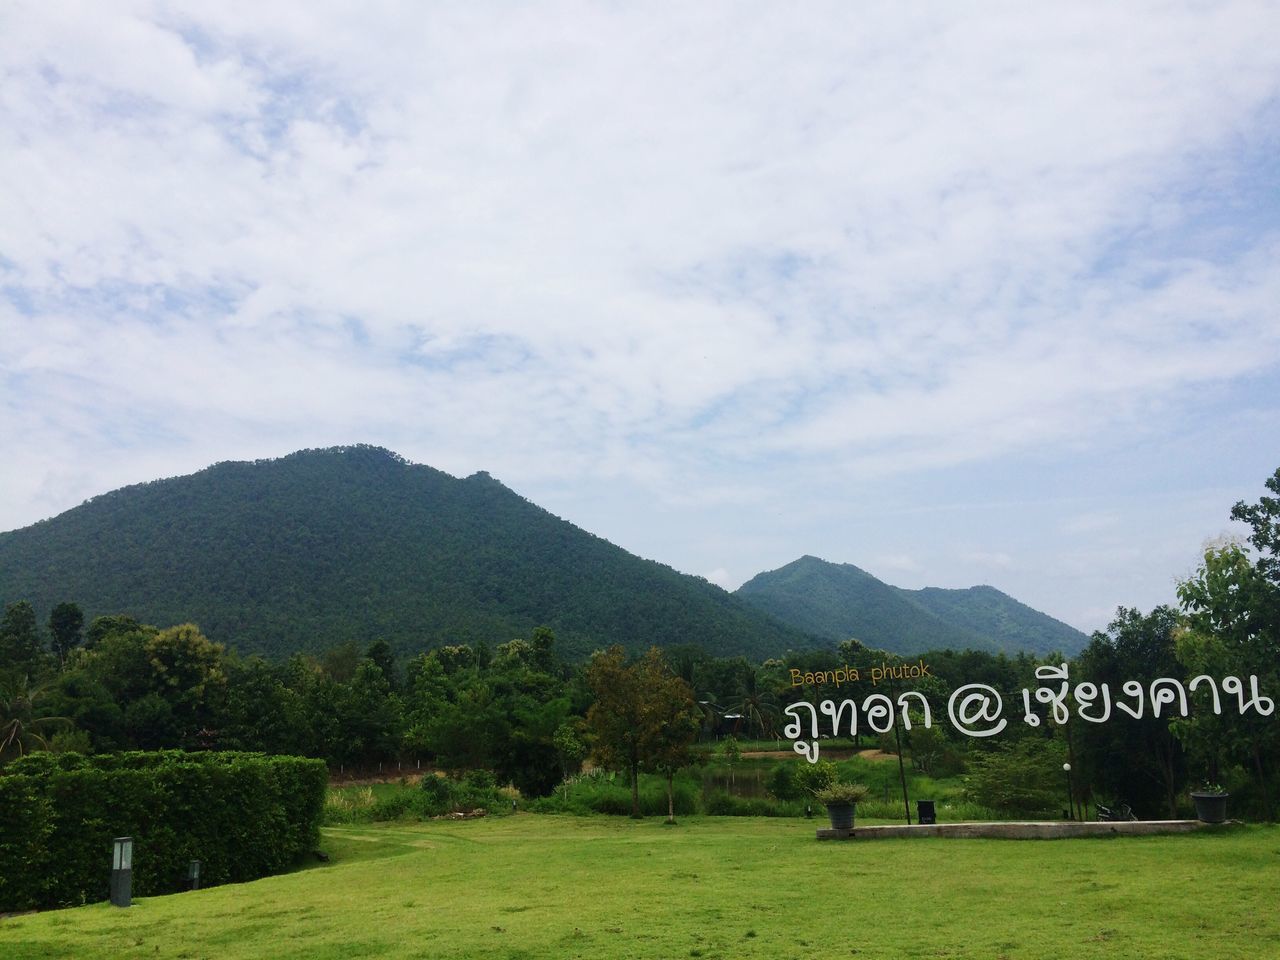 mountain, text, sky, western script, landscape, tranquil scene, communication, mountain range, non-urban scene, scenics, tranquility, cloud, information sign, cloud - sky, field, nature, day, beauty in nature, green color, outdoors, rural scene, remote, solitude, agriculture, tourism, signboard, majestic, vacations